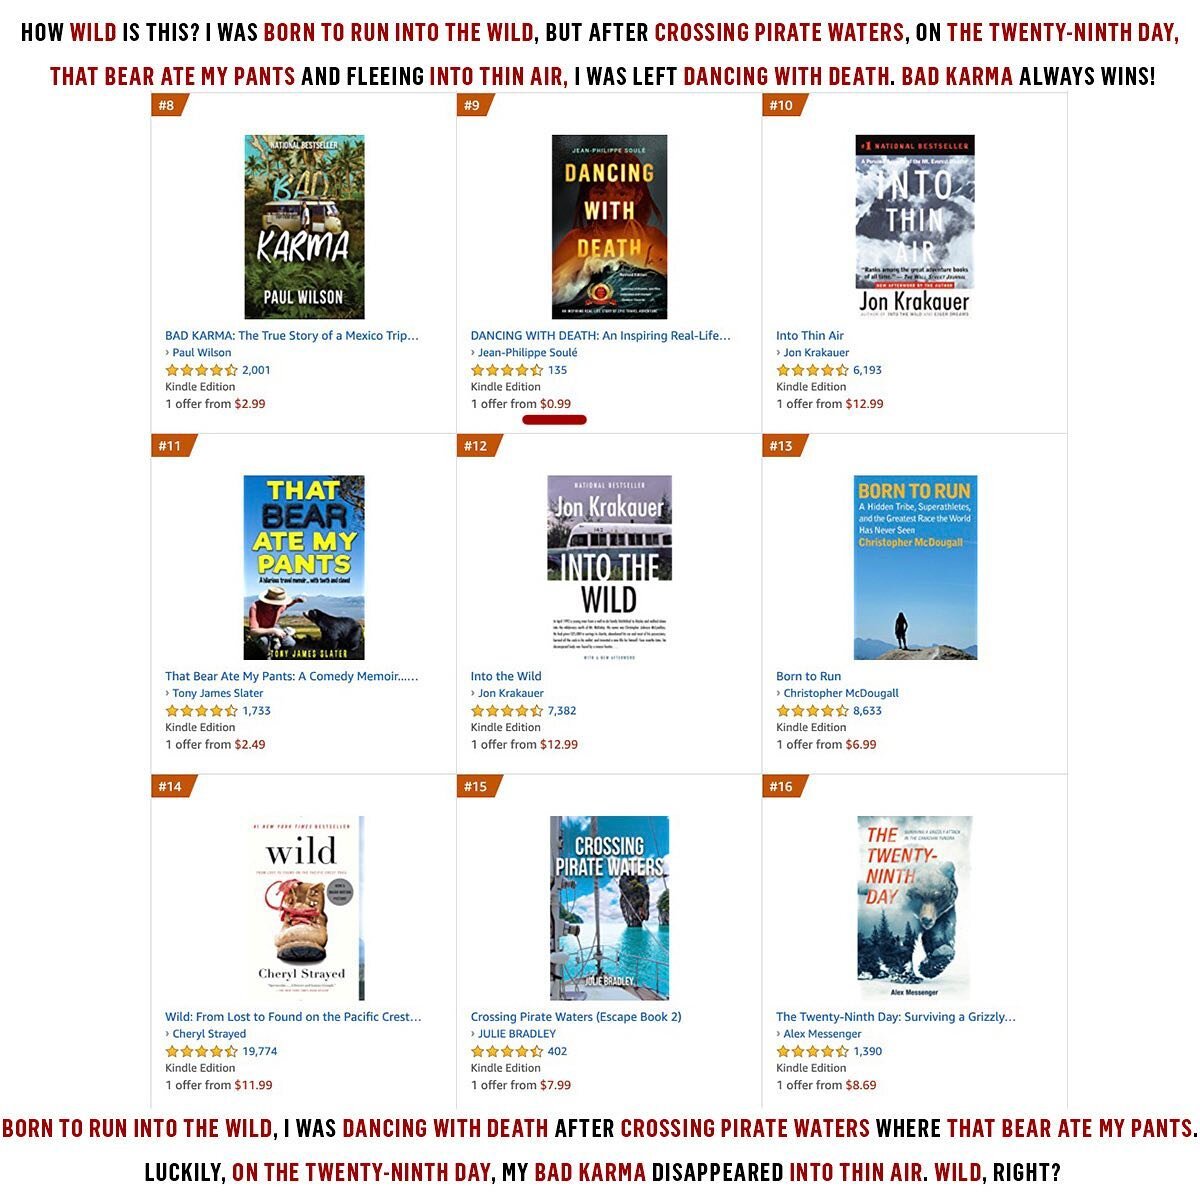 Dancing with Death is in fine company in Adventure-Travel Best Sellers. Check out these word puzzles:

How Wild is this? I was Born to Run Into the Wild, but after Crossing Pirate Waters, on The Twenty-Ninth Day, That Bear Ate My Pants and fleeing 